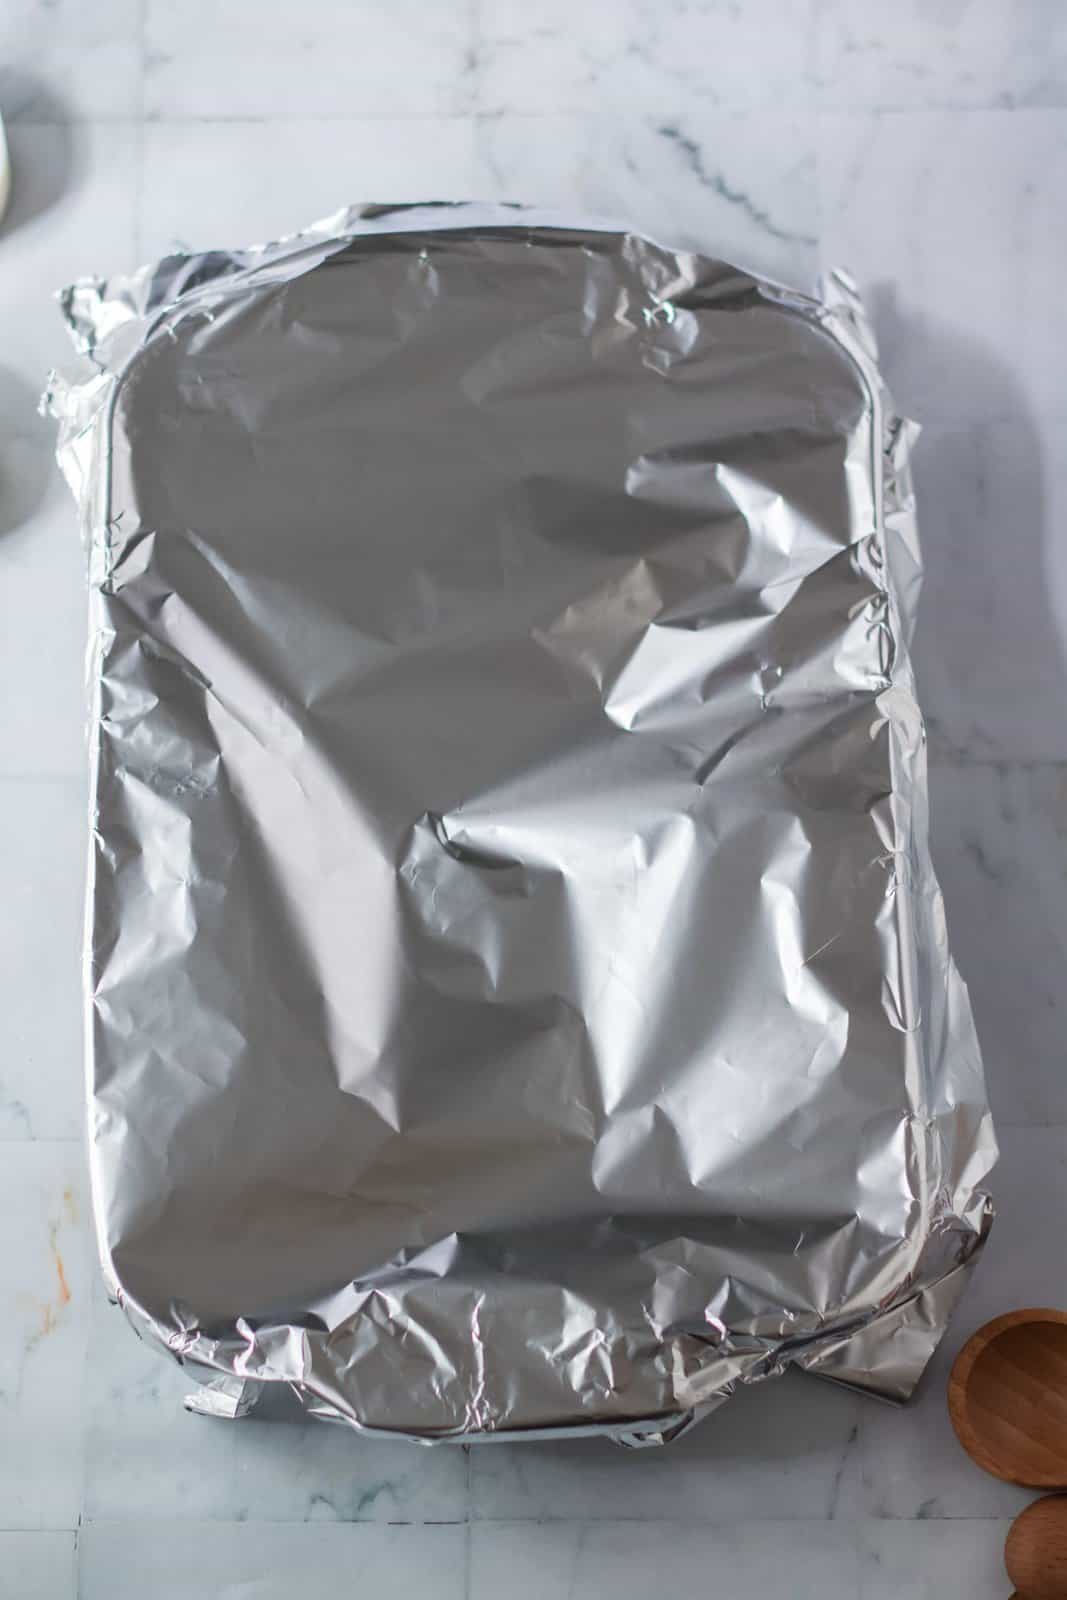 Pan covered with foil ready to be baked.